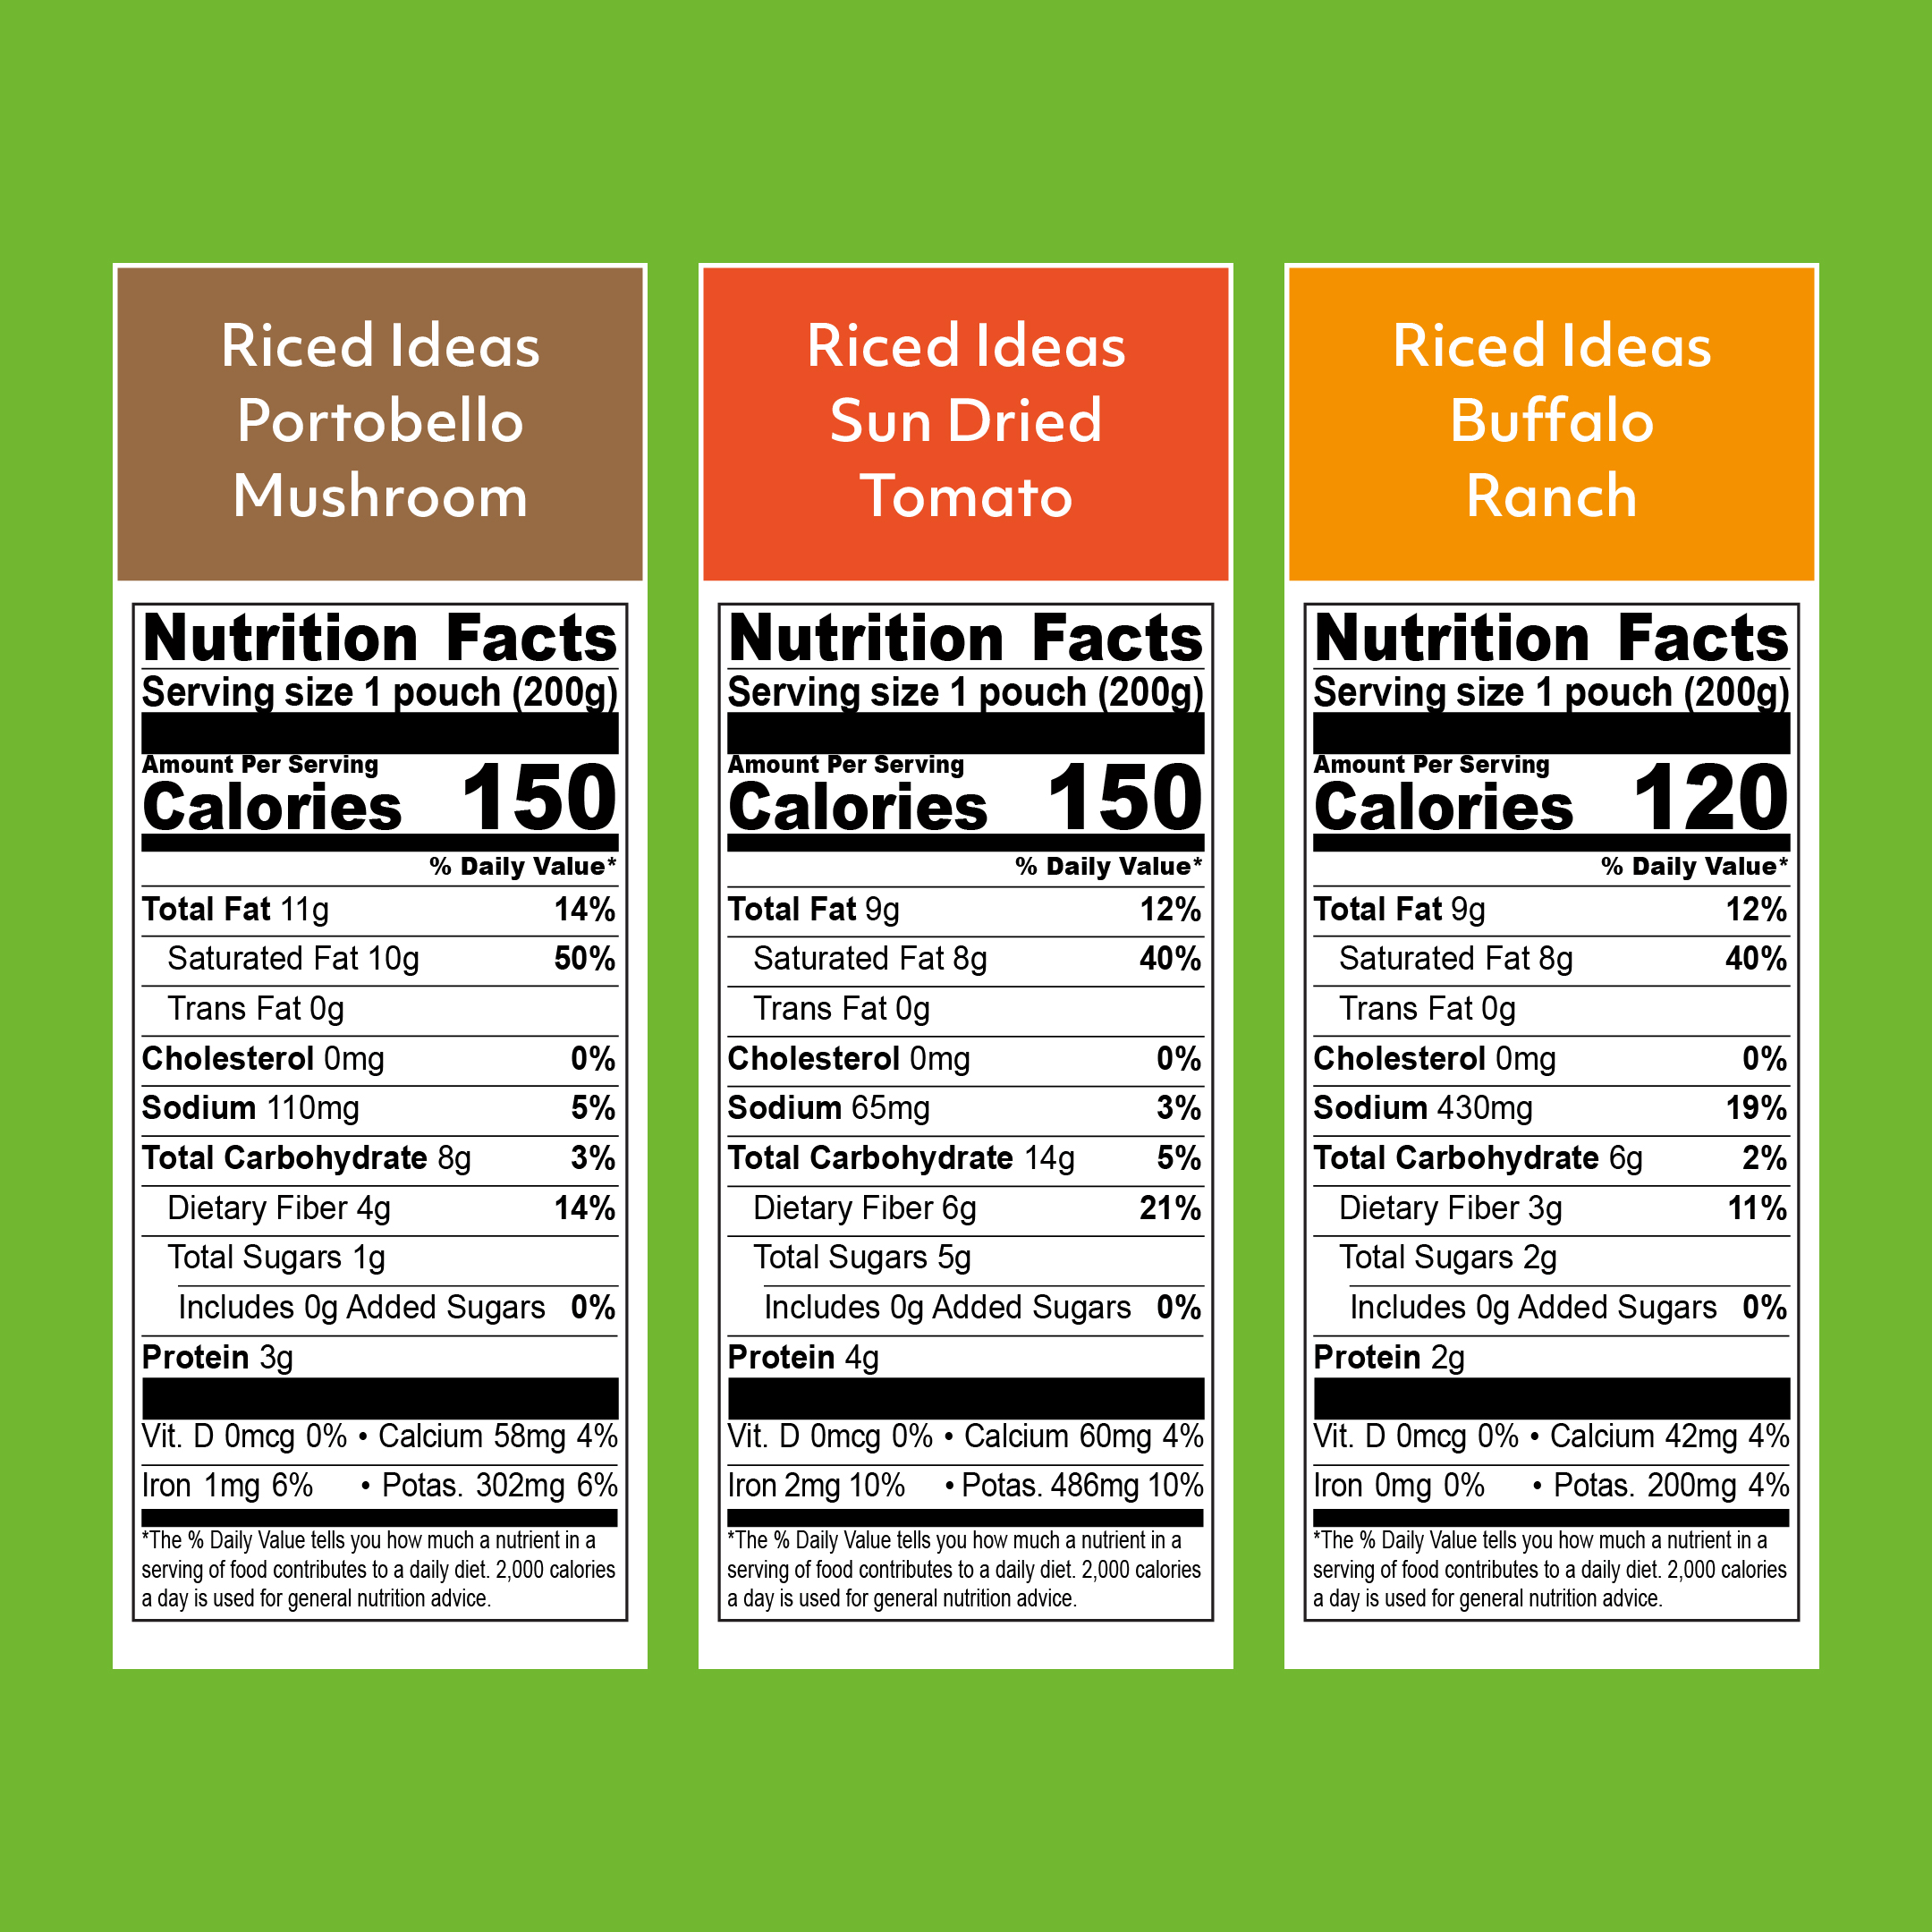 Riced Idea Nutritional information:  Sundried tomato:Serving size 1 pouch (200g)  MACROS  % DAILY VALUE Calories 150 Total Fat 9g 12% Saturated Fat Trans Fat 8g 40% 0g Cholesterol	0mg 0% Sodium 65mg 3% Total Carbohydrate 14g 5% Dietary Fiber 6g 21% Total sugars  5g Includes 0g added Sugars 0% Protein 4g Vit.D 0 mcg / 0% Calcium 60 mg / 4% Iron 2 mg / 10% Potassium 486 mcg / 10%. Buffalo Ranch: Serving size 1 pouch (200g)    MACROS % DAILY VALUE Calories 120 Total Fat 9g 12% Saturated Fat Trans Fat 8g 40% 0g Cholesterol 0mg 0% Sodium 430mg 19% Total Carbohydrate 	6g 2% Dietary Fiber 3g 11% Total sugars 2g Includes 0g added Sugars 0% Protein 2g Vit.D 0 mcg / 0% Calcium 42 mg / 4% Iron 0 mcg / 0% Potassium 200 mcg / 4%. Portobello Mushroom: Serving size 1 pouch (200g)    MACROS % DAILY VALUE Calories 150 Total Fat 11g 14% Saturated Fat Trans Fat 10g 50% 0g Cholesterol 0mg 0%g Sodium 110mg 5% Total Carbohydrate 8g 3% Dietary Fiber 4g 14% Total sugars 1g Includes 0g added Sugars 0% Protein 3g Vit.D 0 mcg / 0% Calcium 58 mg / 4% Iron 1 mg / 6% Potassium 302 mcg / 6%